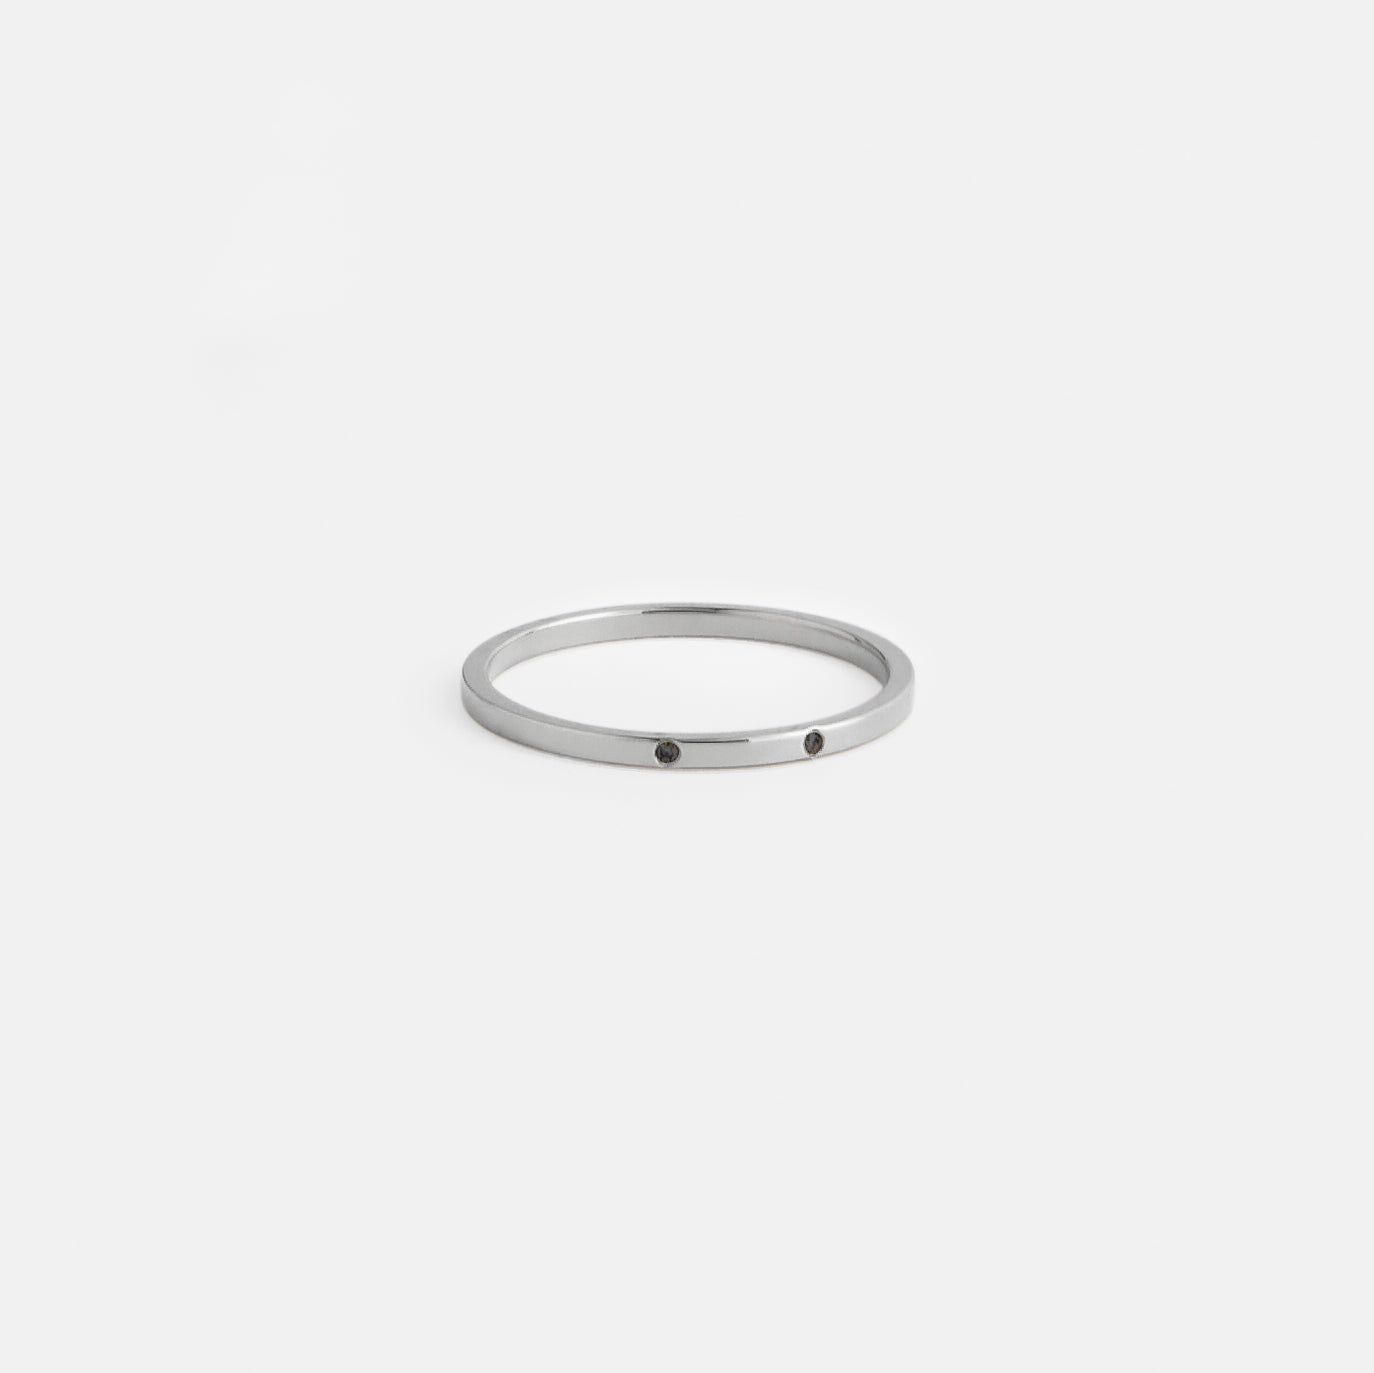 Sarala Handmade Ring in 14k White Gold set with Black Diamonds By SHW Fine Jewelry New York City